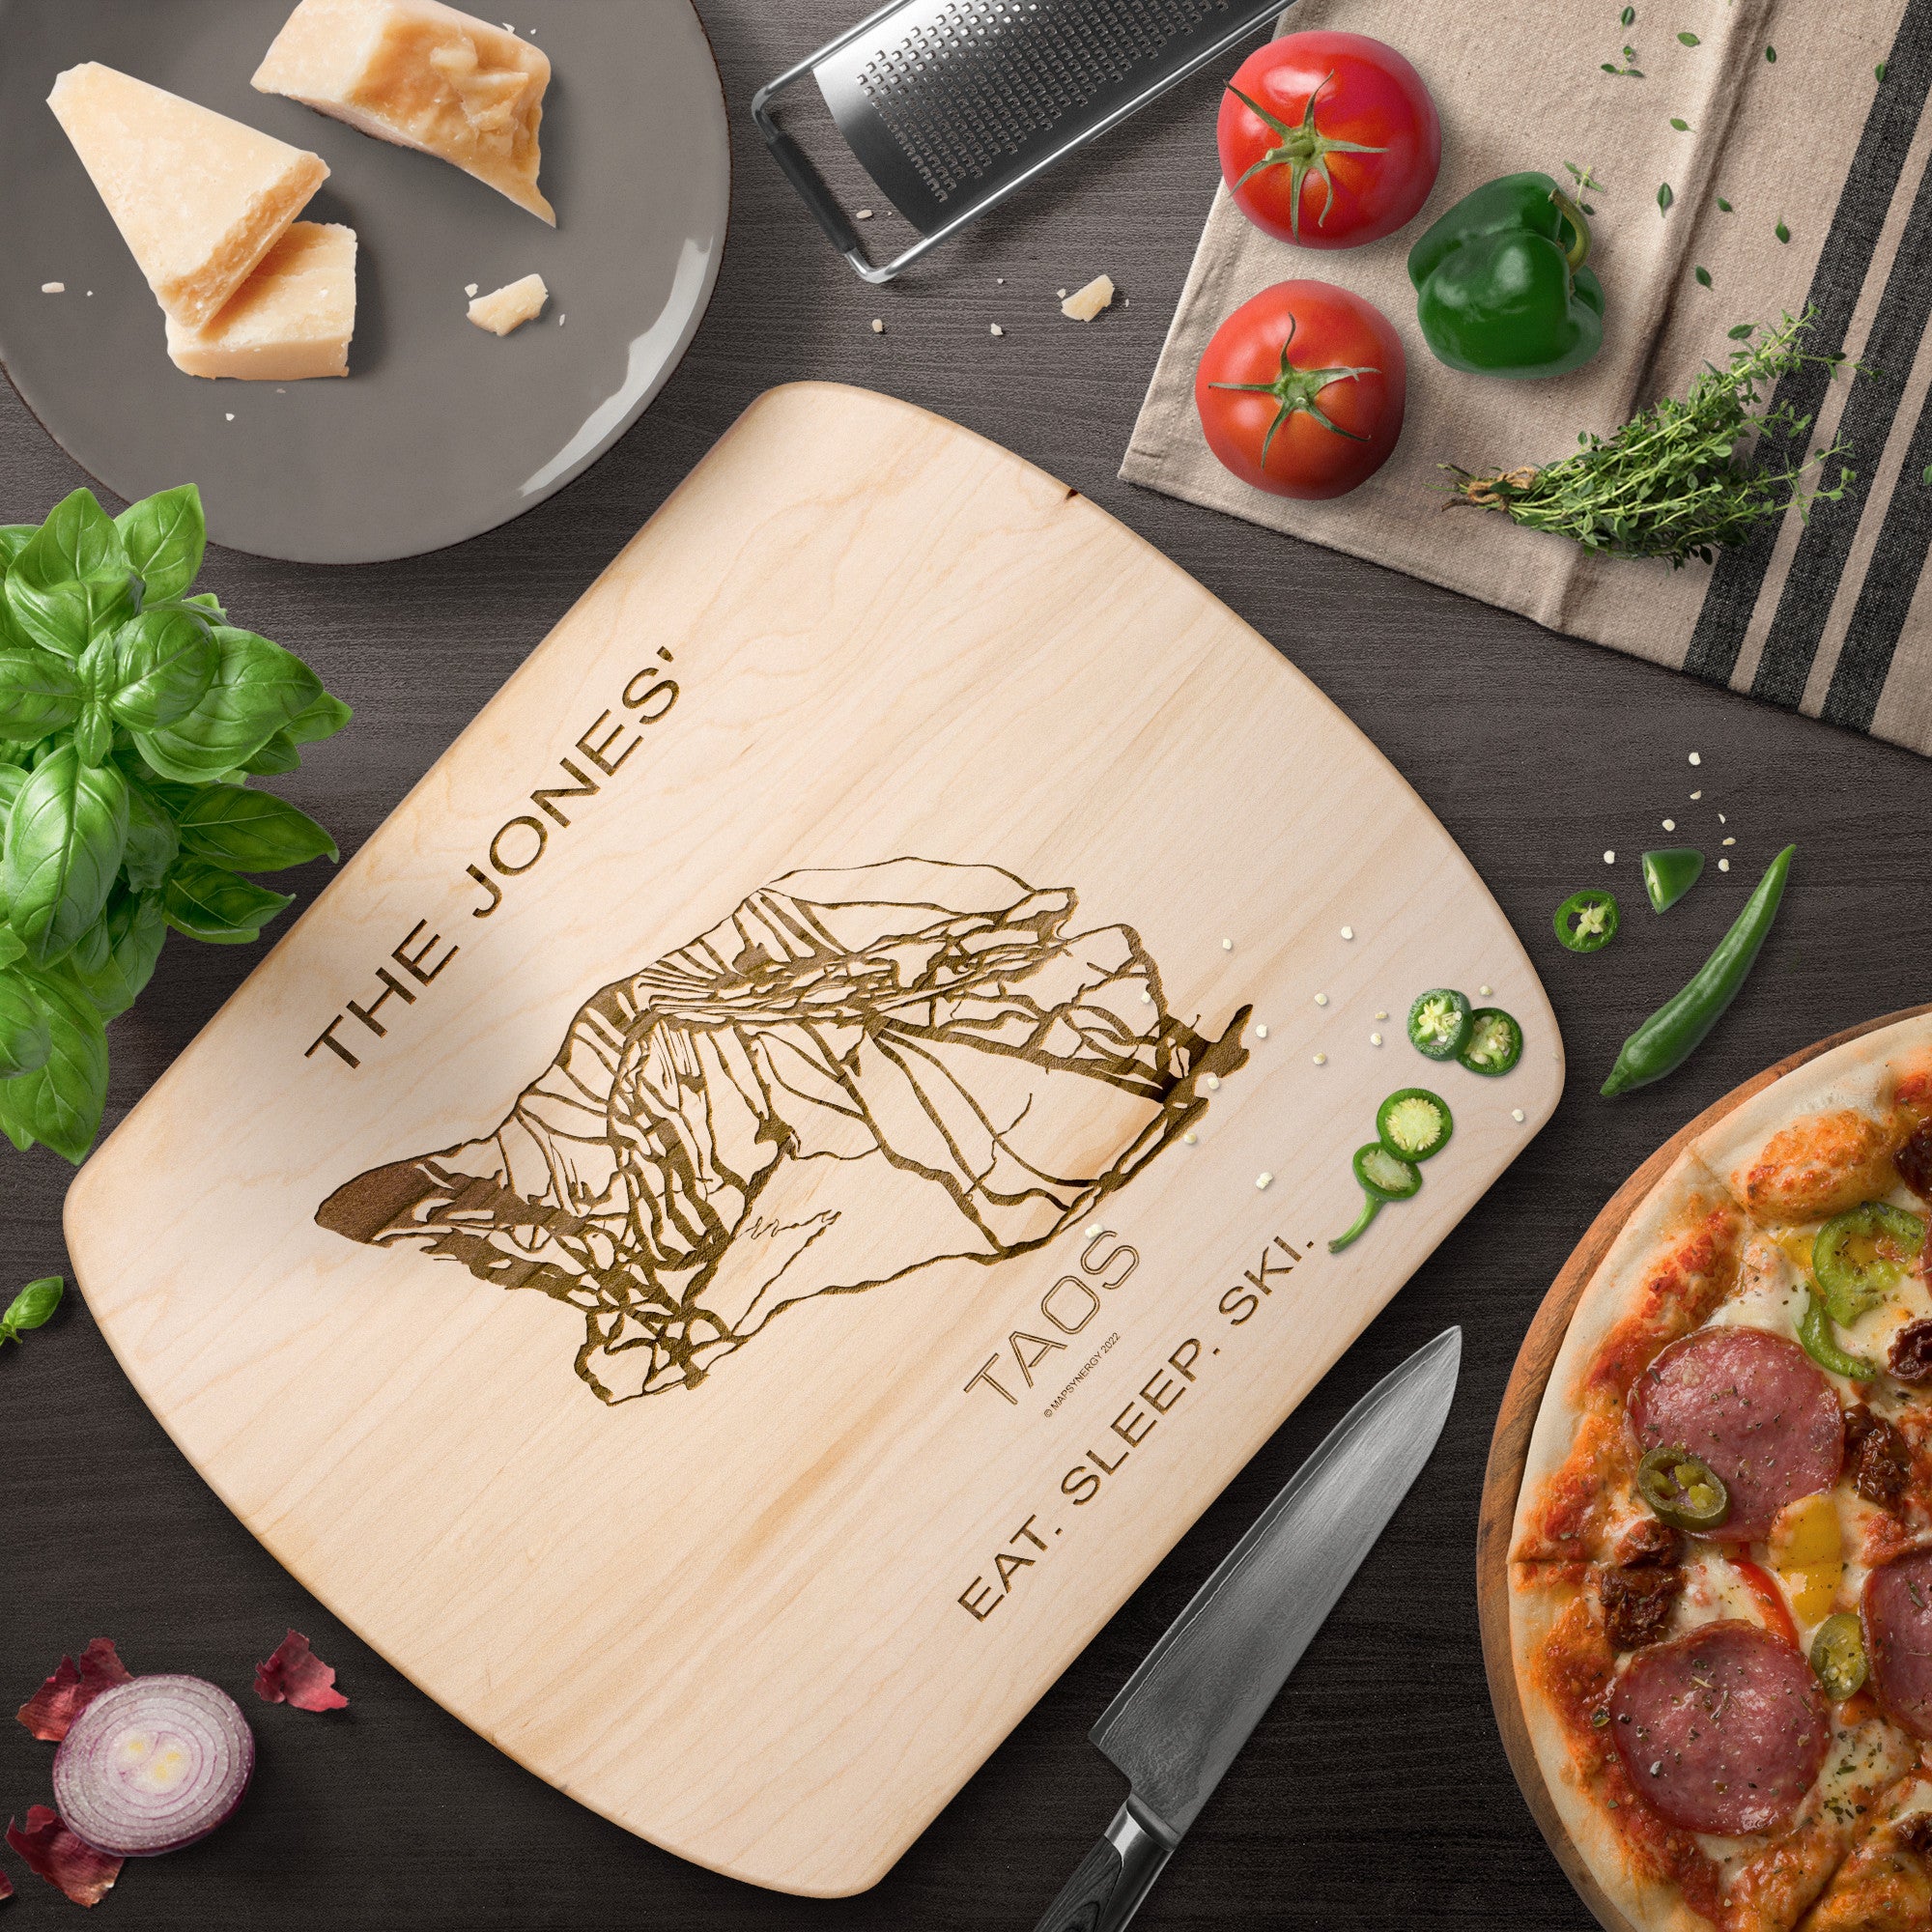 PERSONALIZED Taos , New Mexico SKI TRAIL MAP CUTTING BOARD